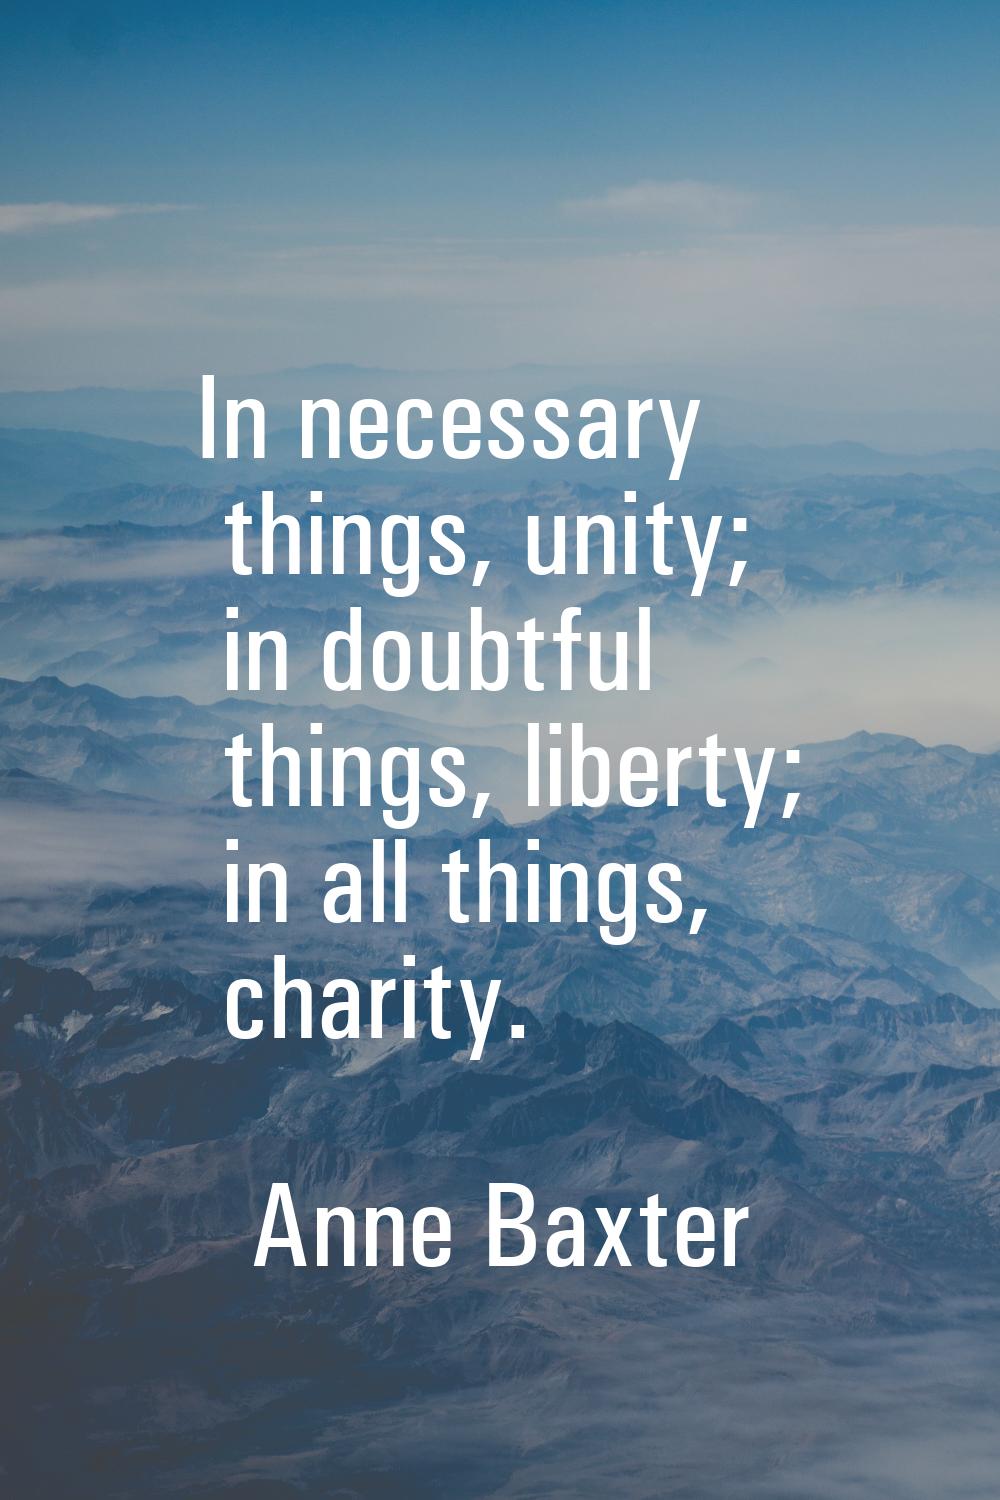 In necessary things, unity; in doubtful things, liberty; in all things, charity.